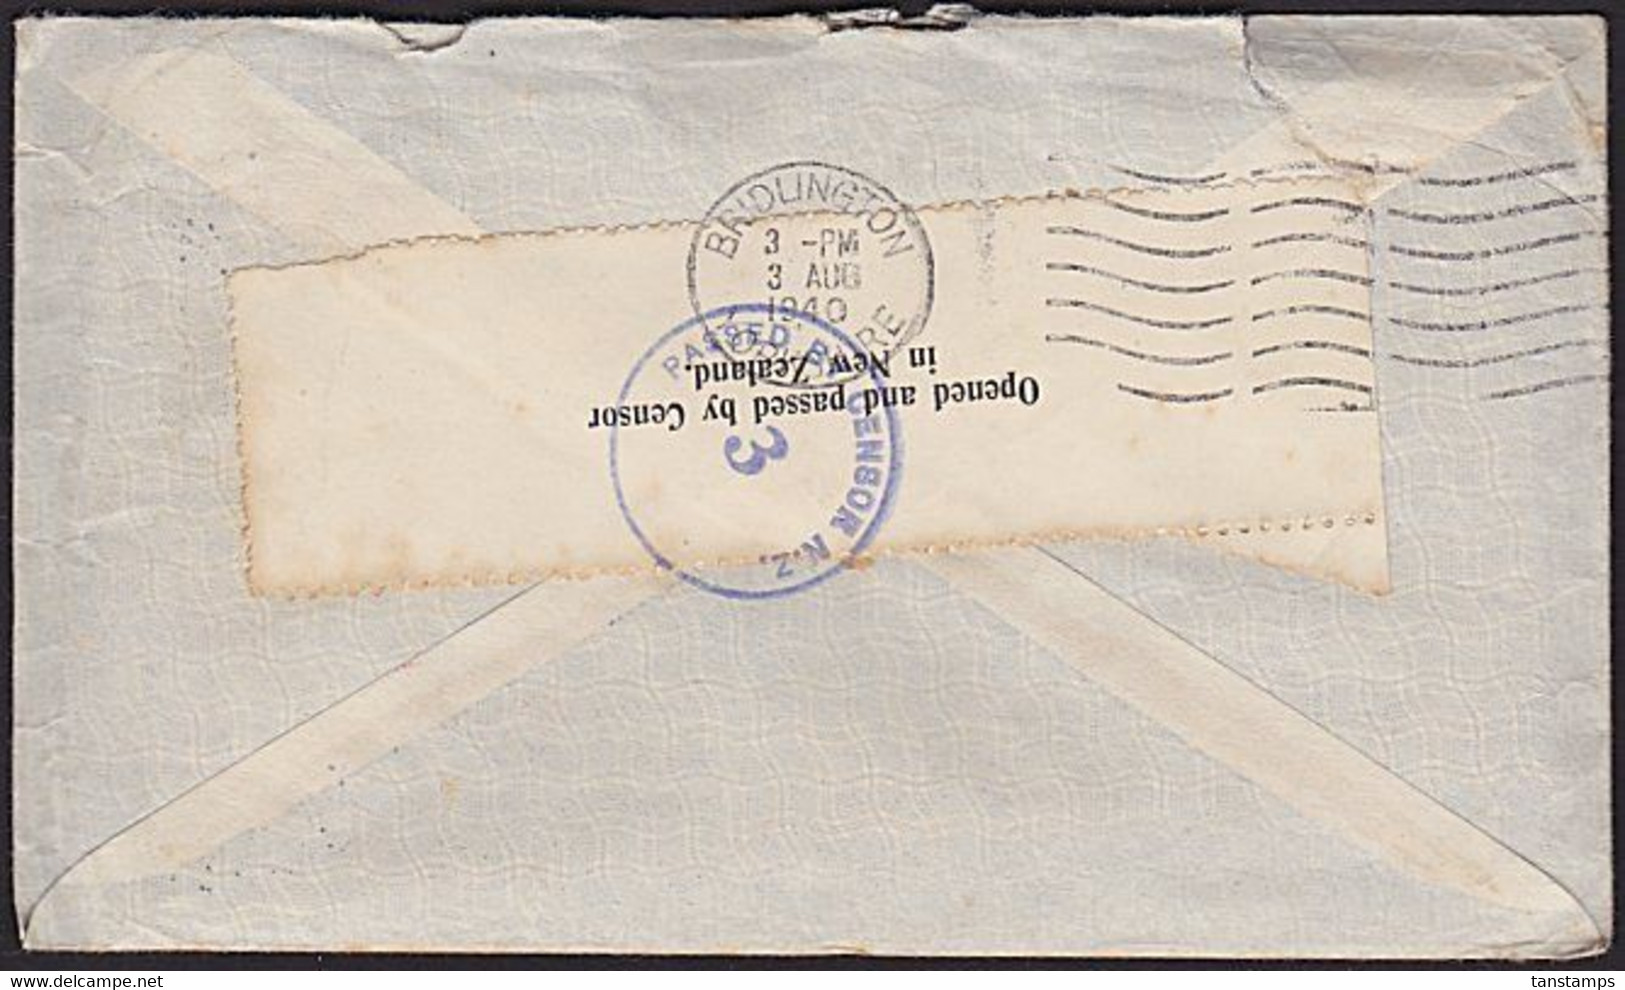 NEW ZEALAND - ENGLAND WWII 6/3 AIRMAIL RATE USING 6s ARMS REVENUE PASSED BY CENSOR 3 FIRST FLIGHT COVER - Brieven En Documenten